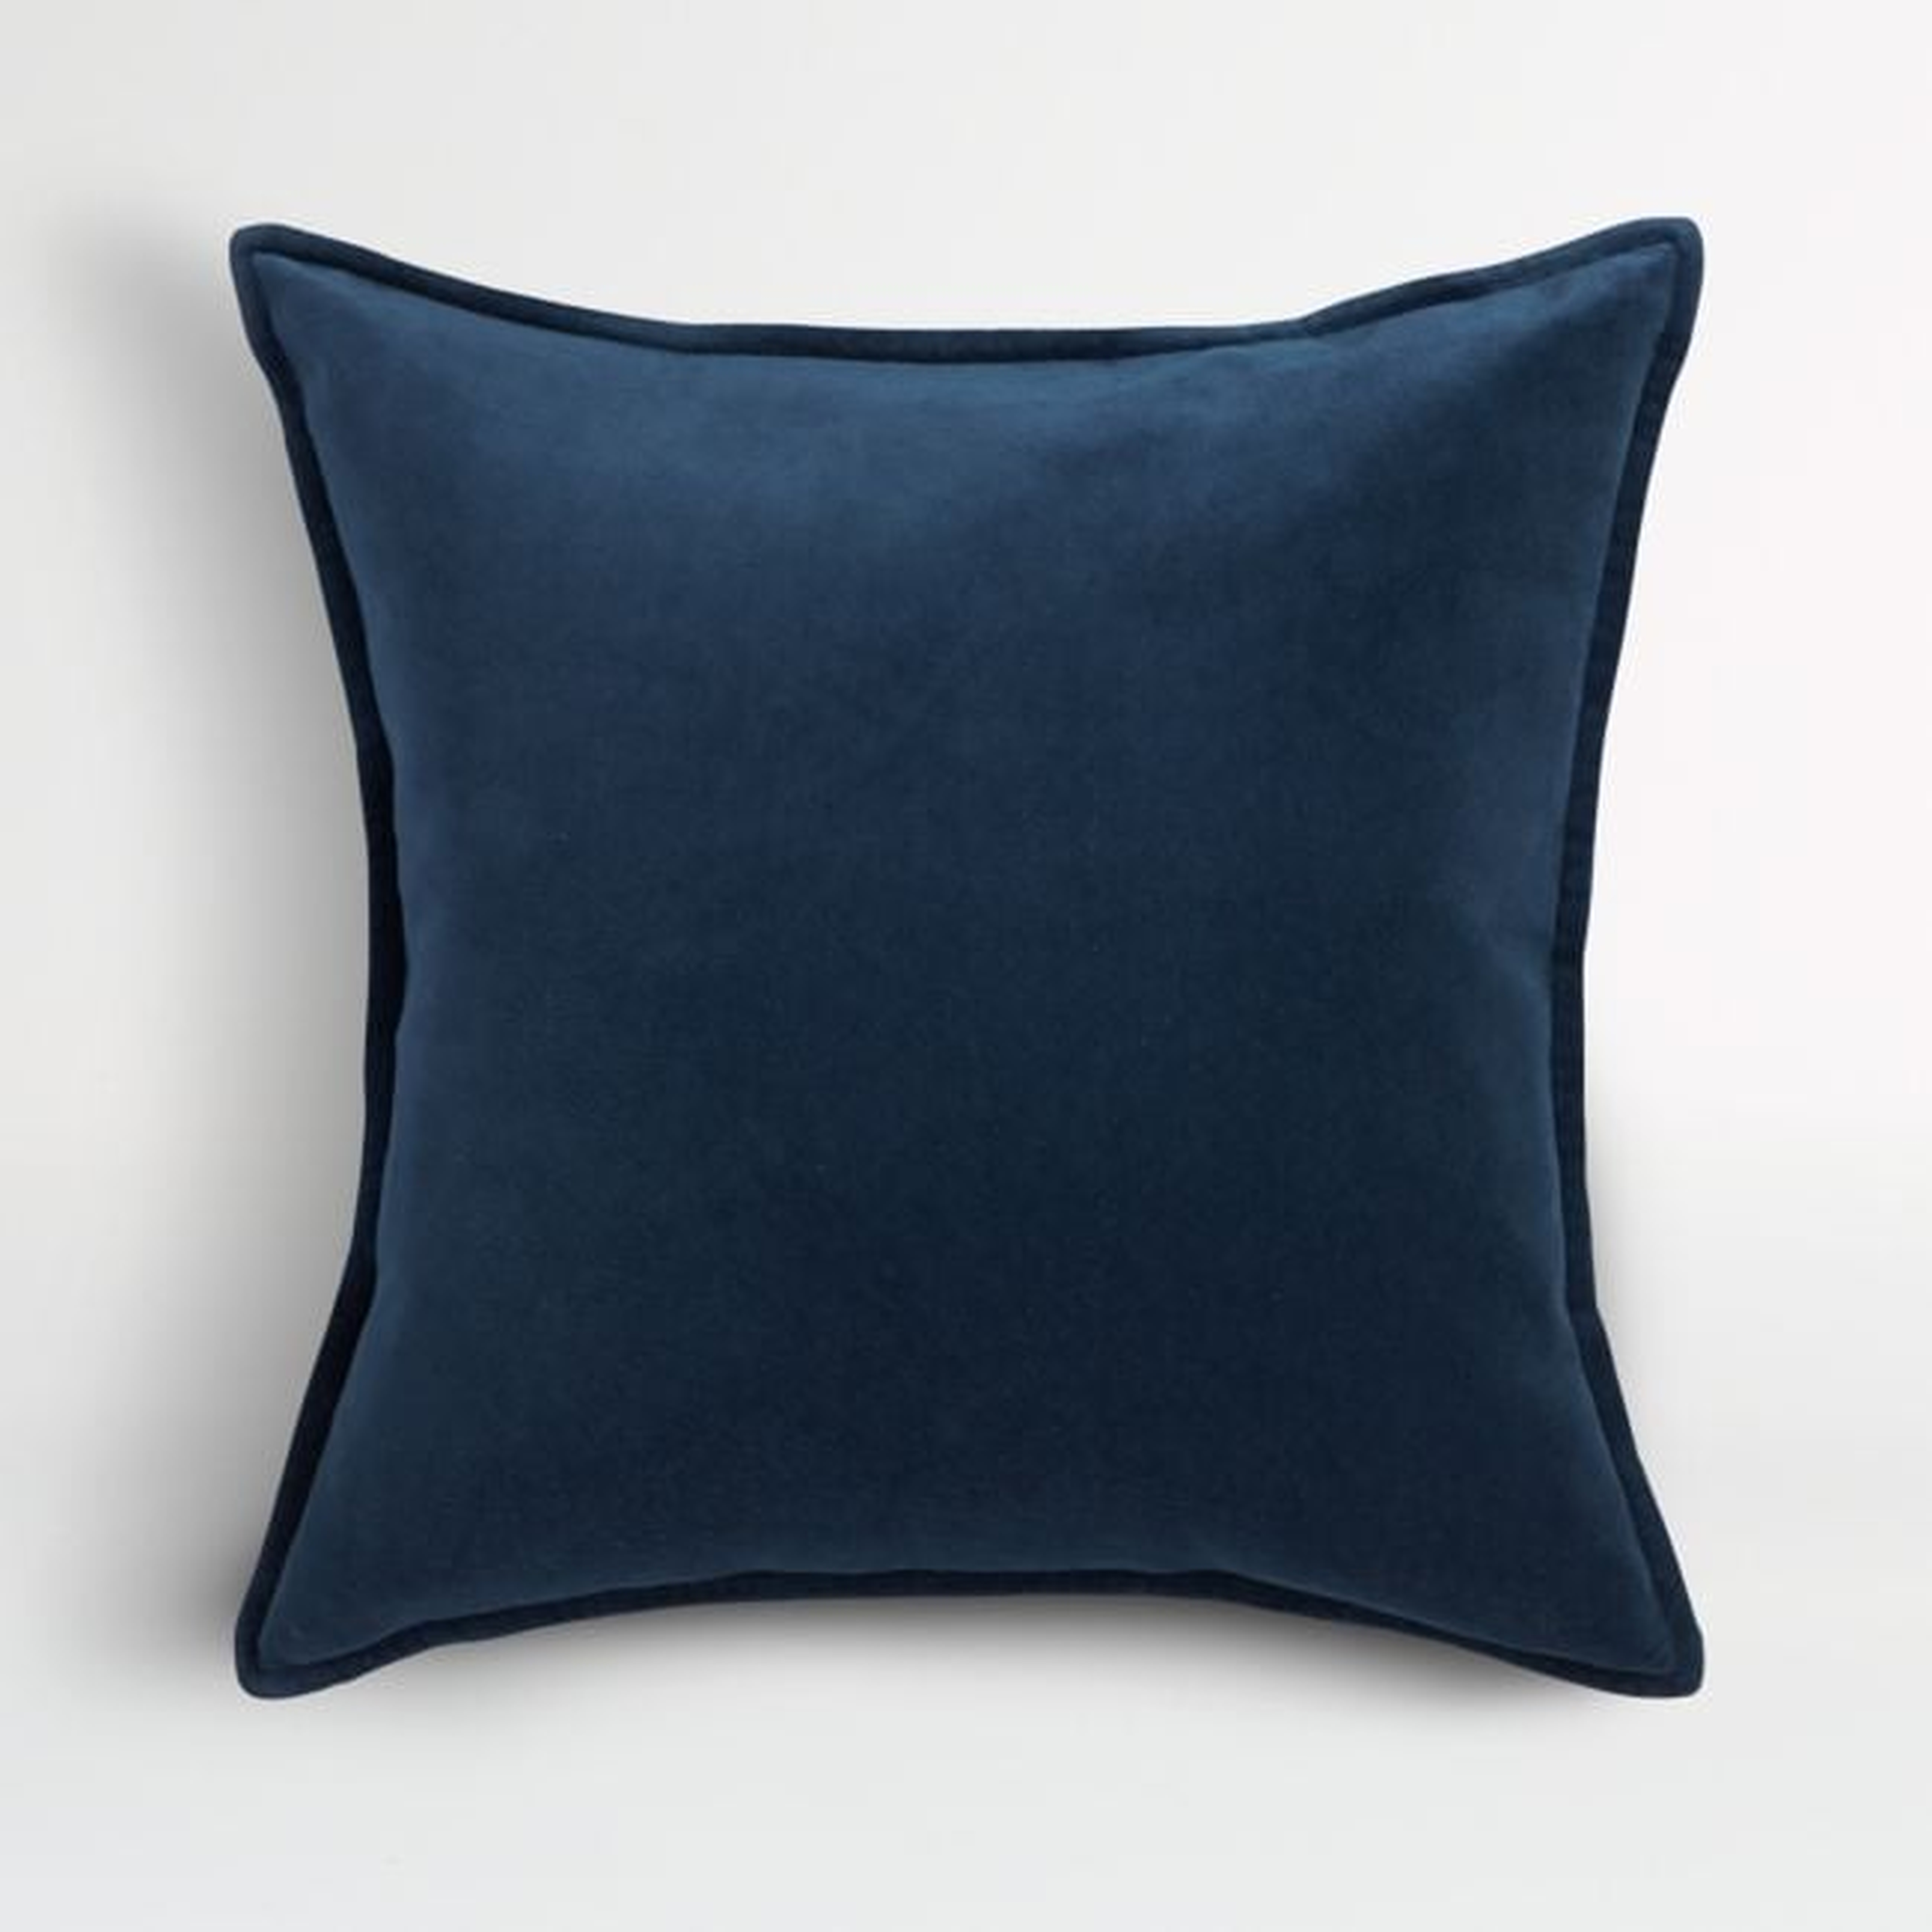 Indigo Blue 20" Washed Cotton Velvet Pillow Cover - Crate and Barrel